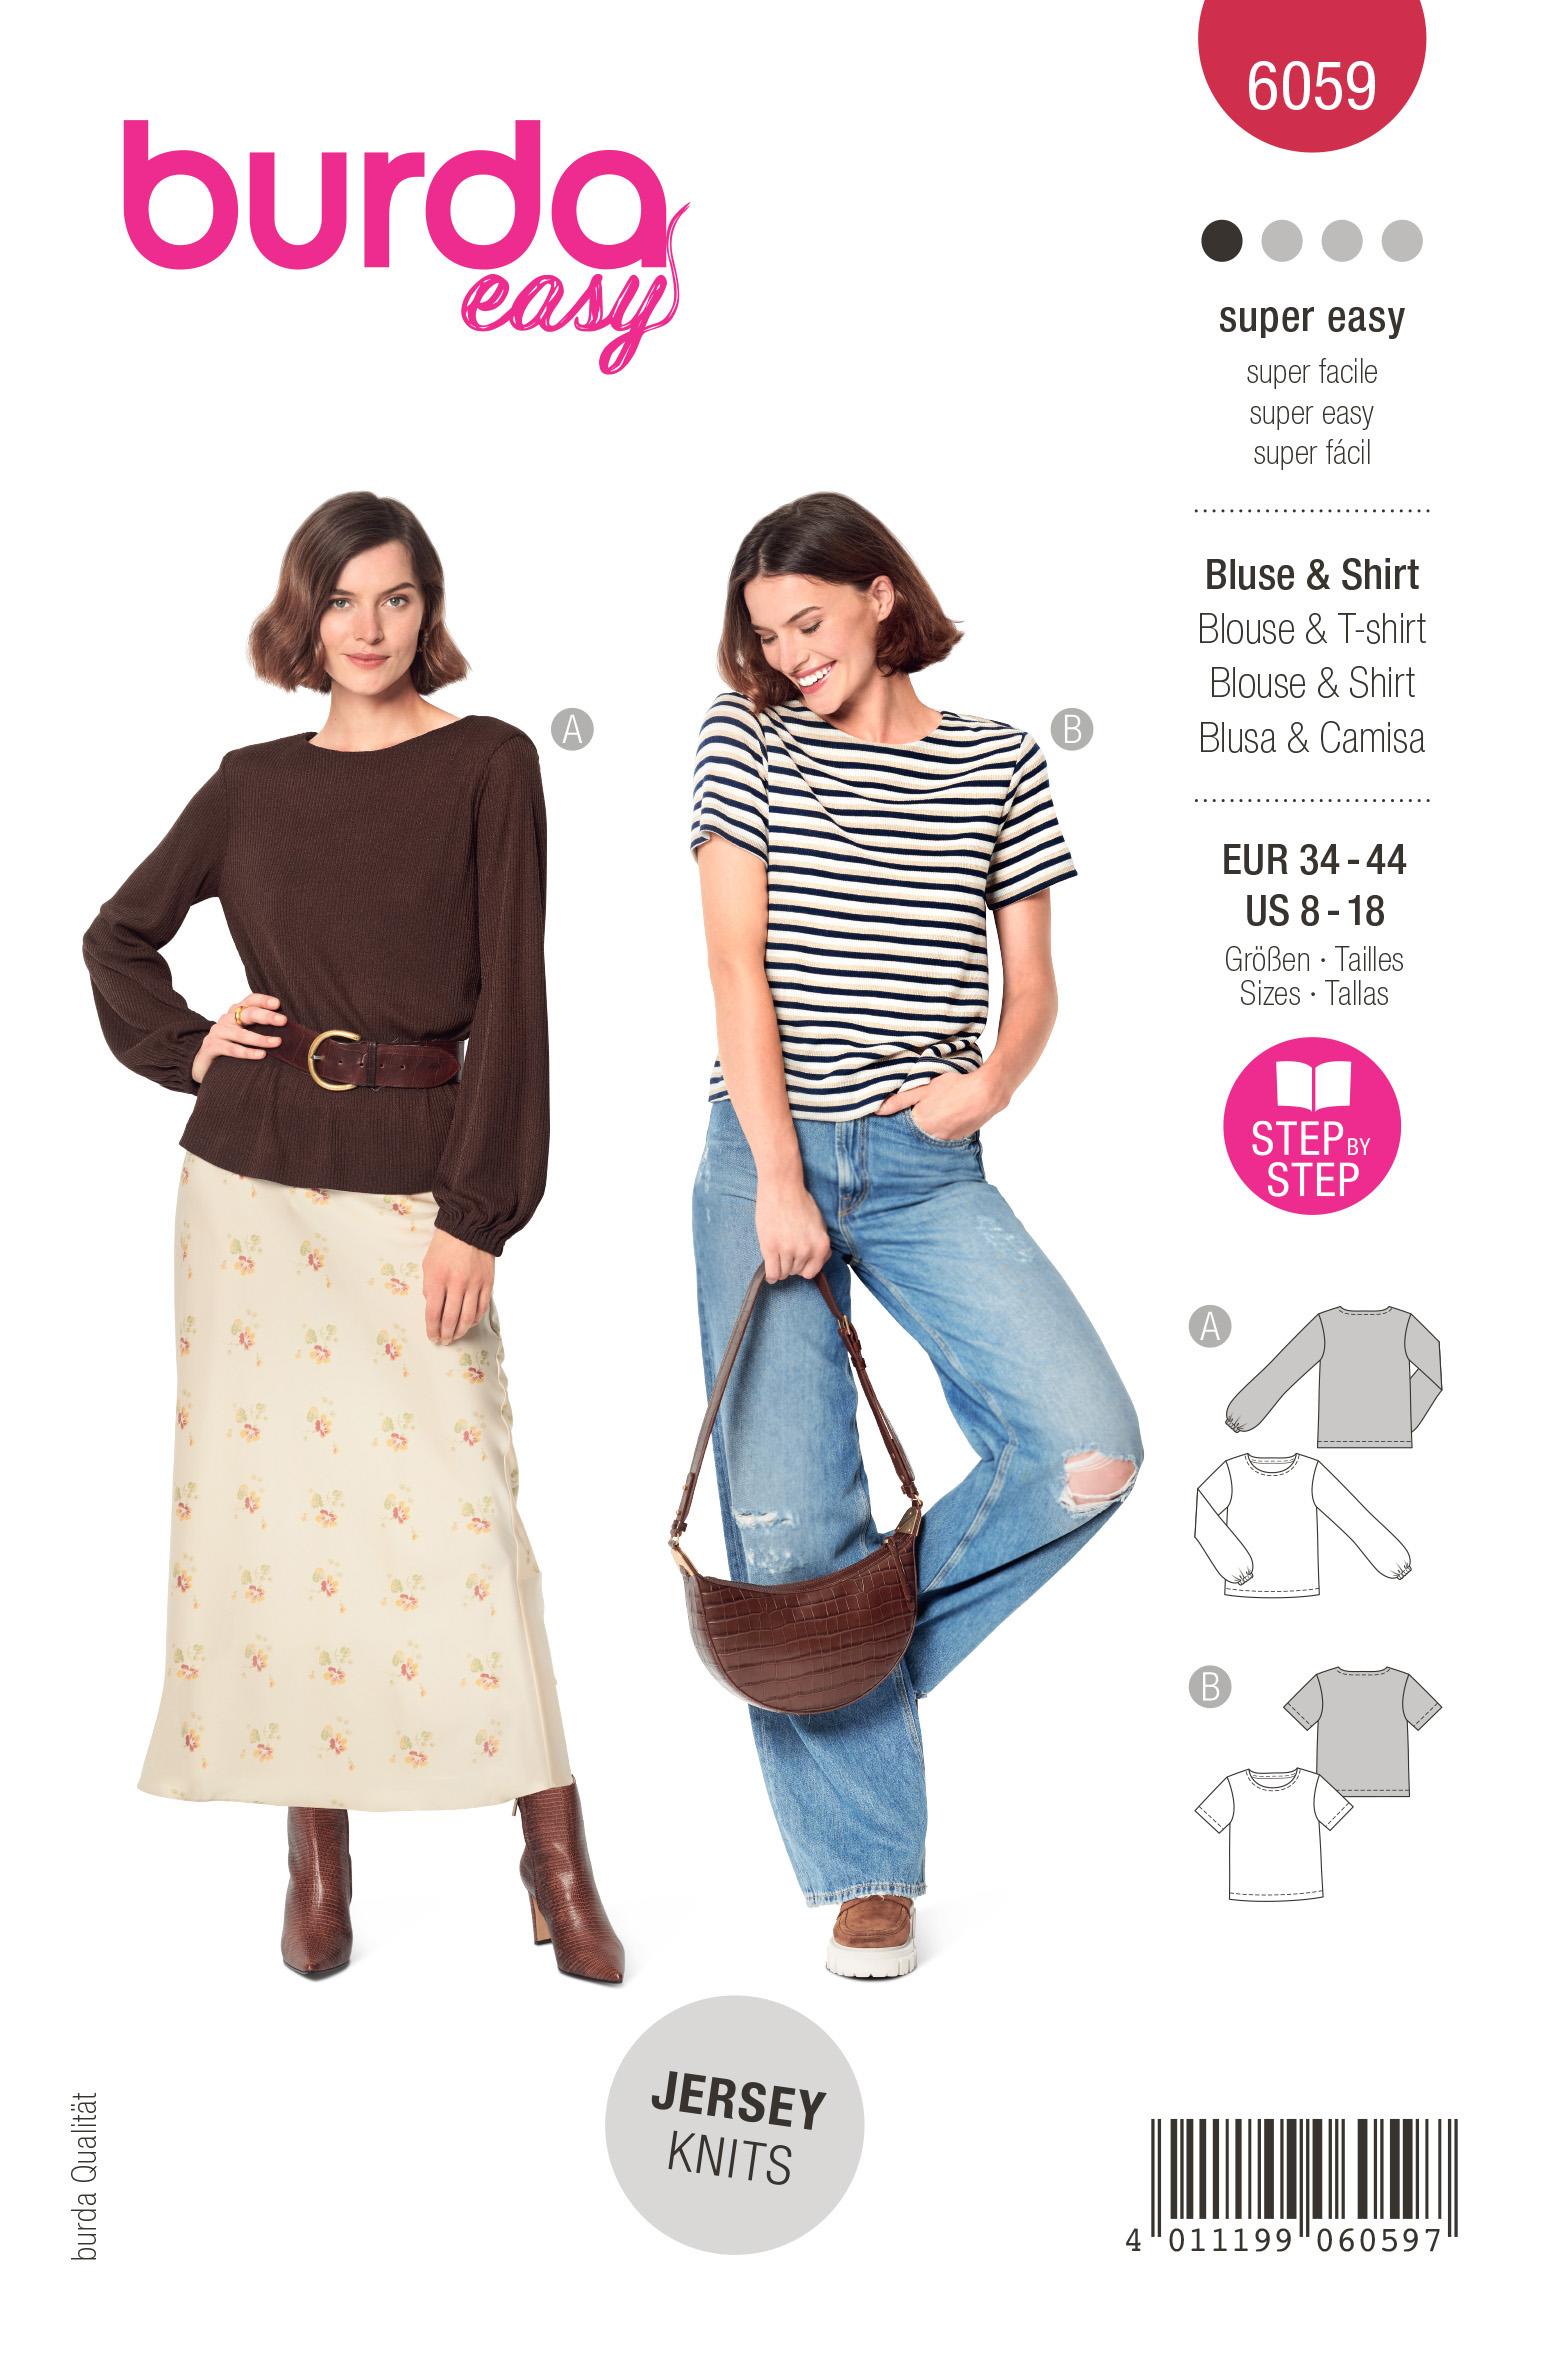 Burda Style Pattern 6059 Misses' Top and Blouse